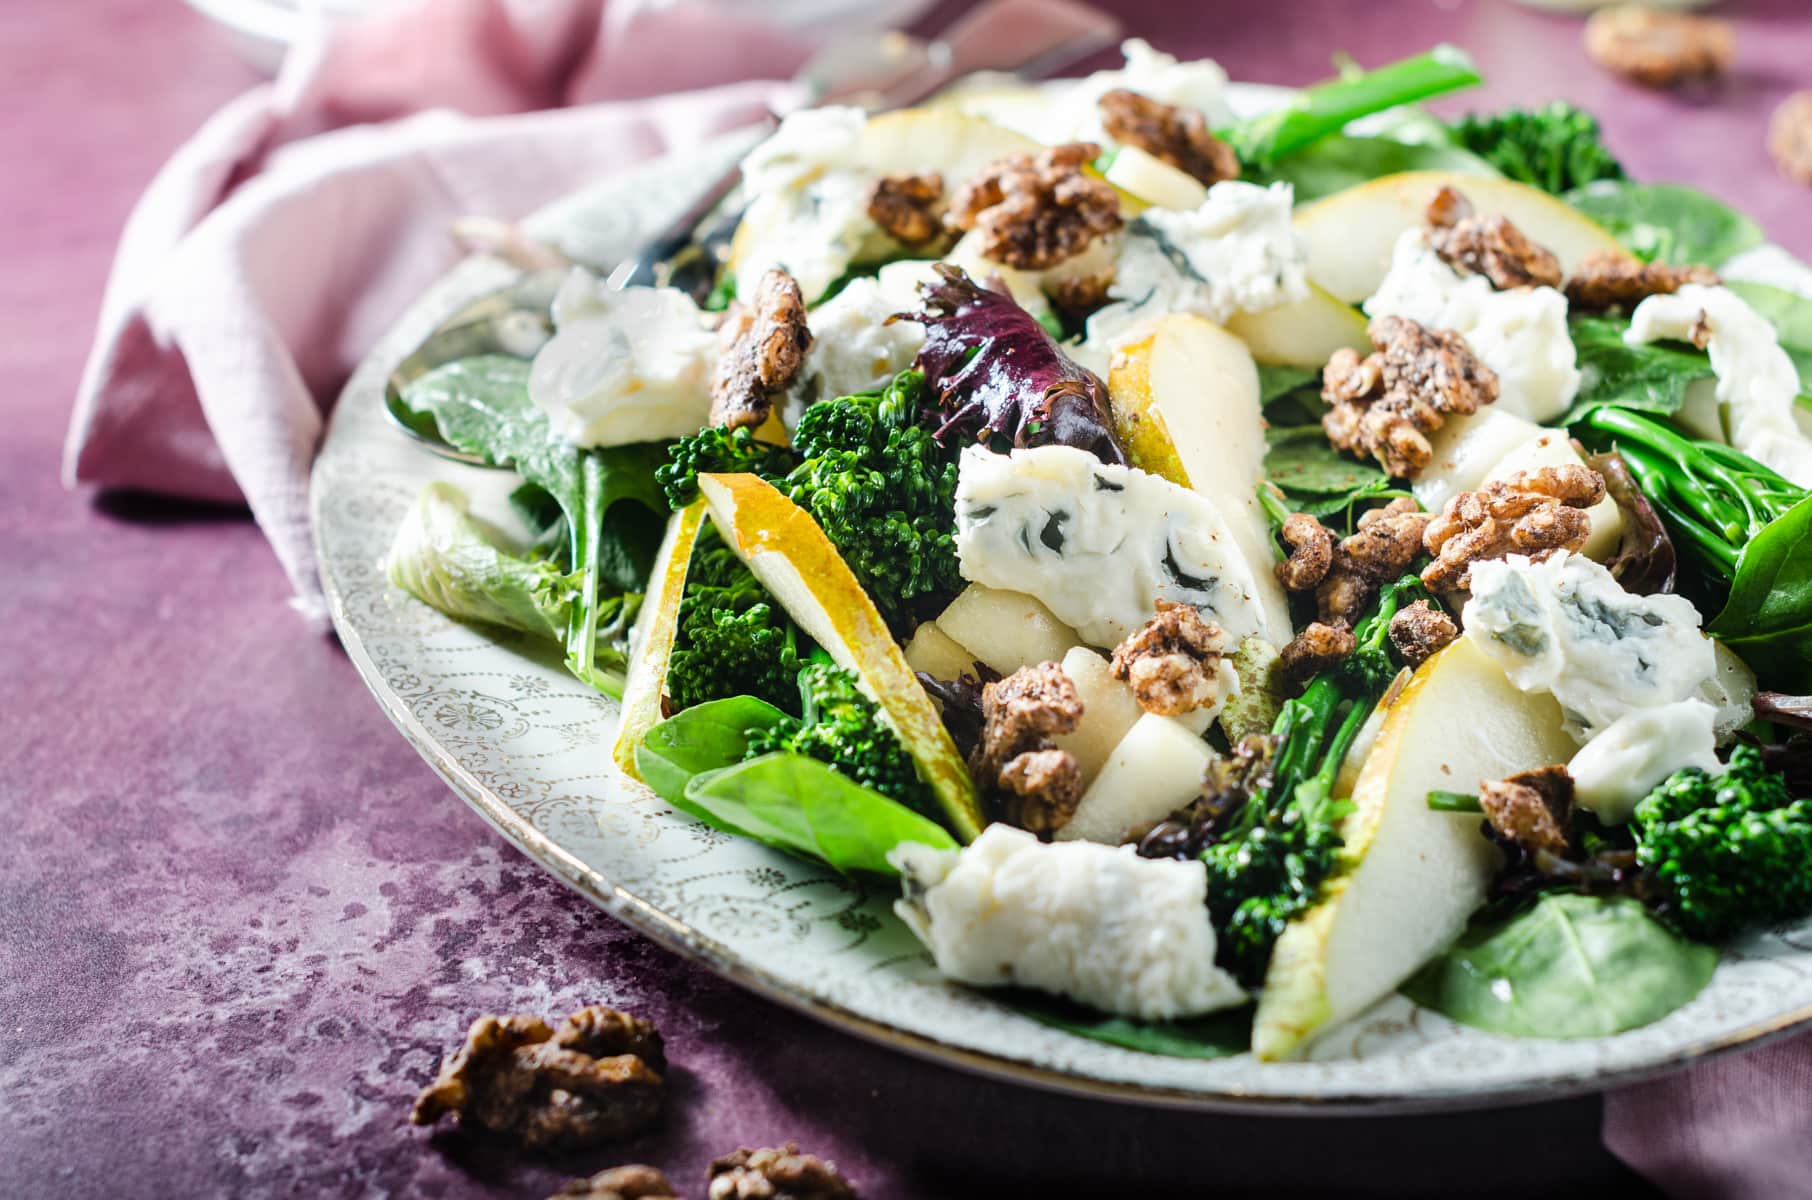 A closeup view of a winter salad consisting of pear, broccoli, spiced walnuts and blue cheese on a gold edged patterned platter sitting on a purple tablecloth.